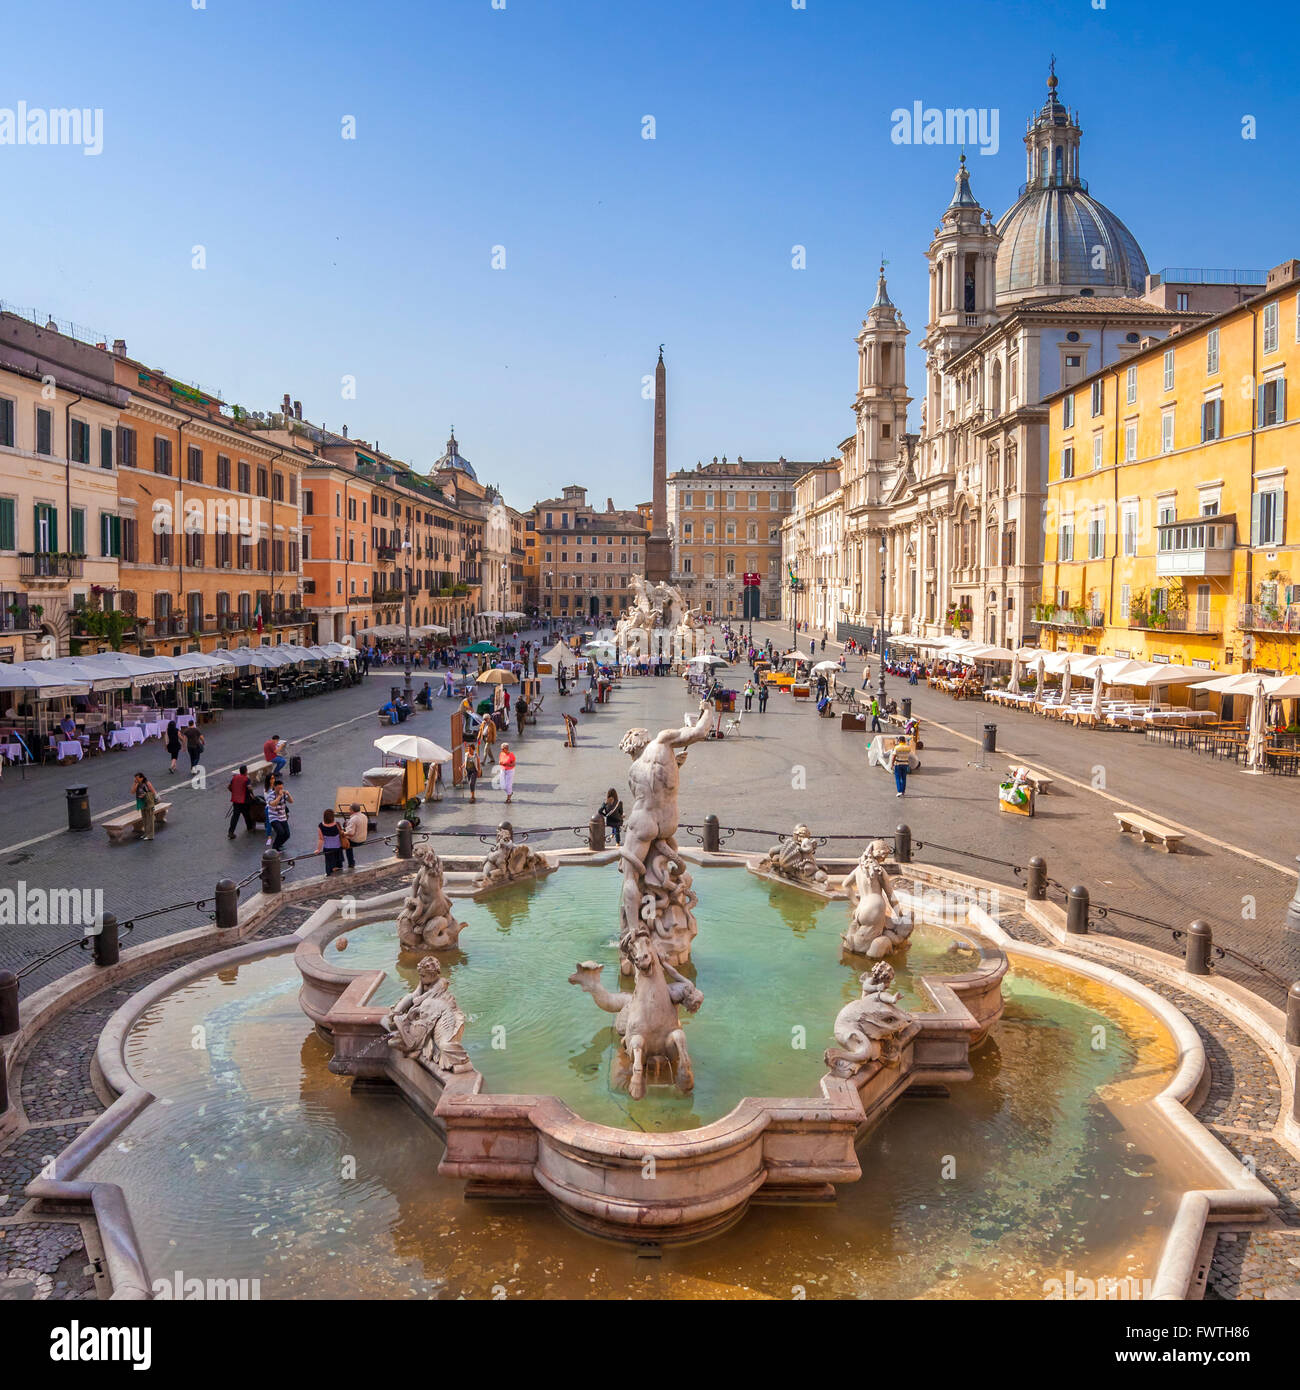 Neptune fountain from above in Piazza Navona, Rome, Italy Stock Photo